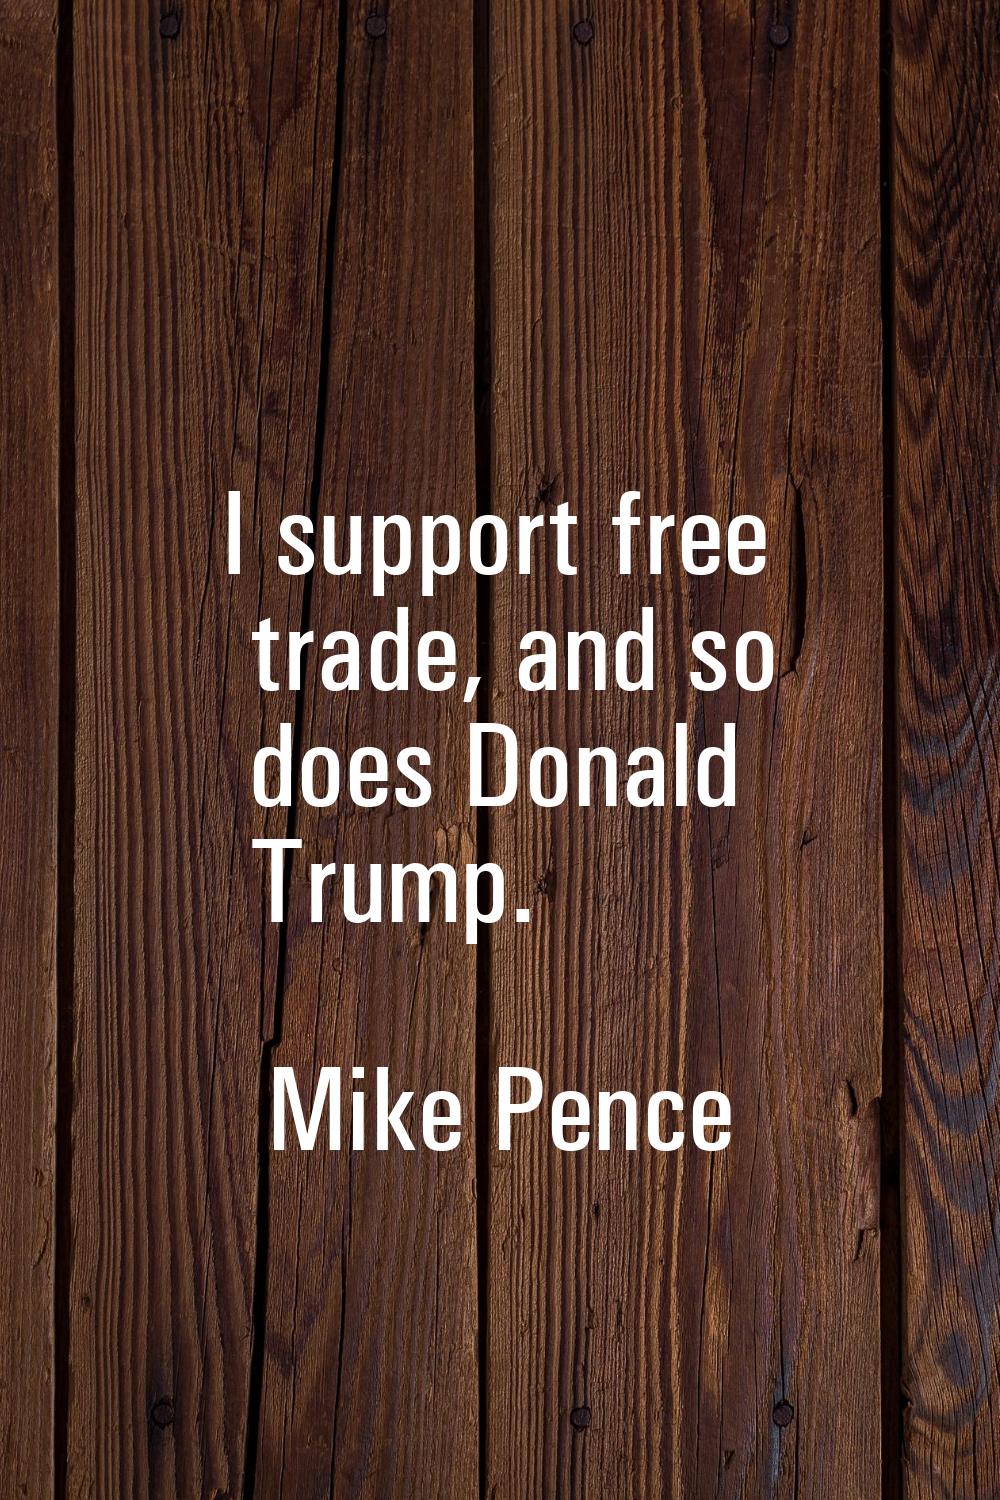 I support free trade, and so does Donald Trump.